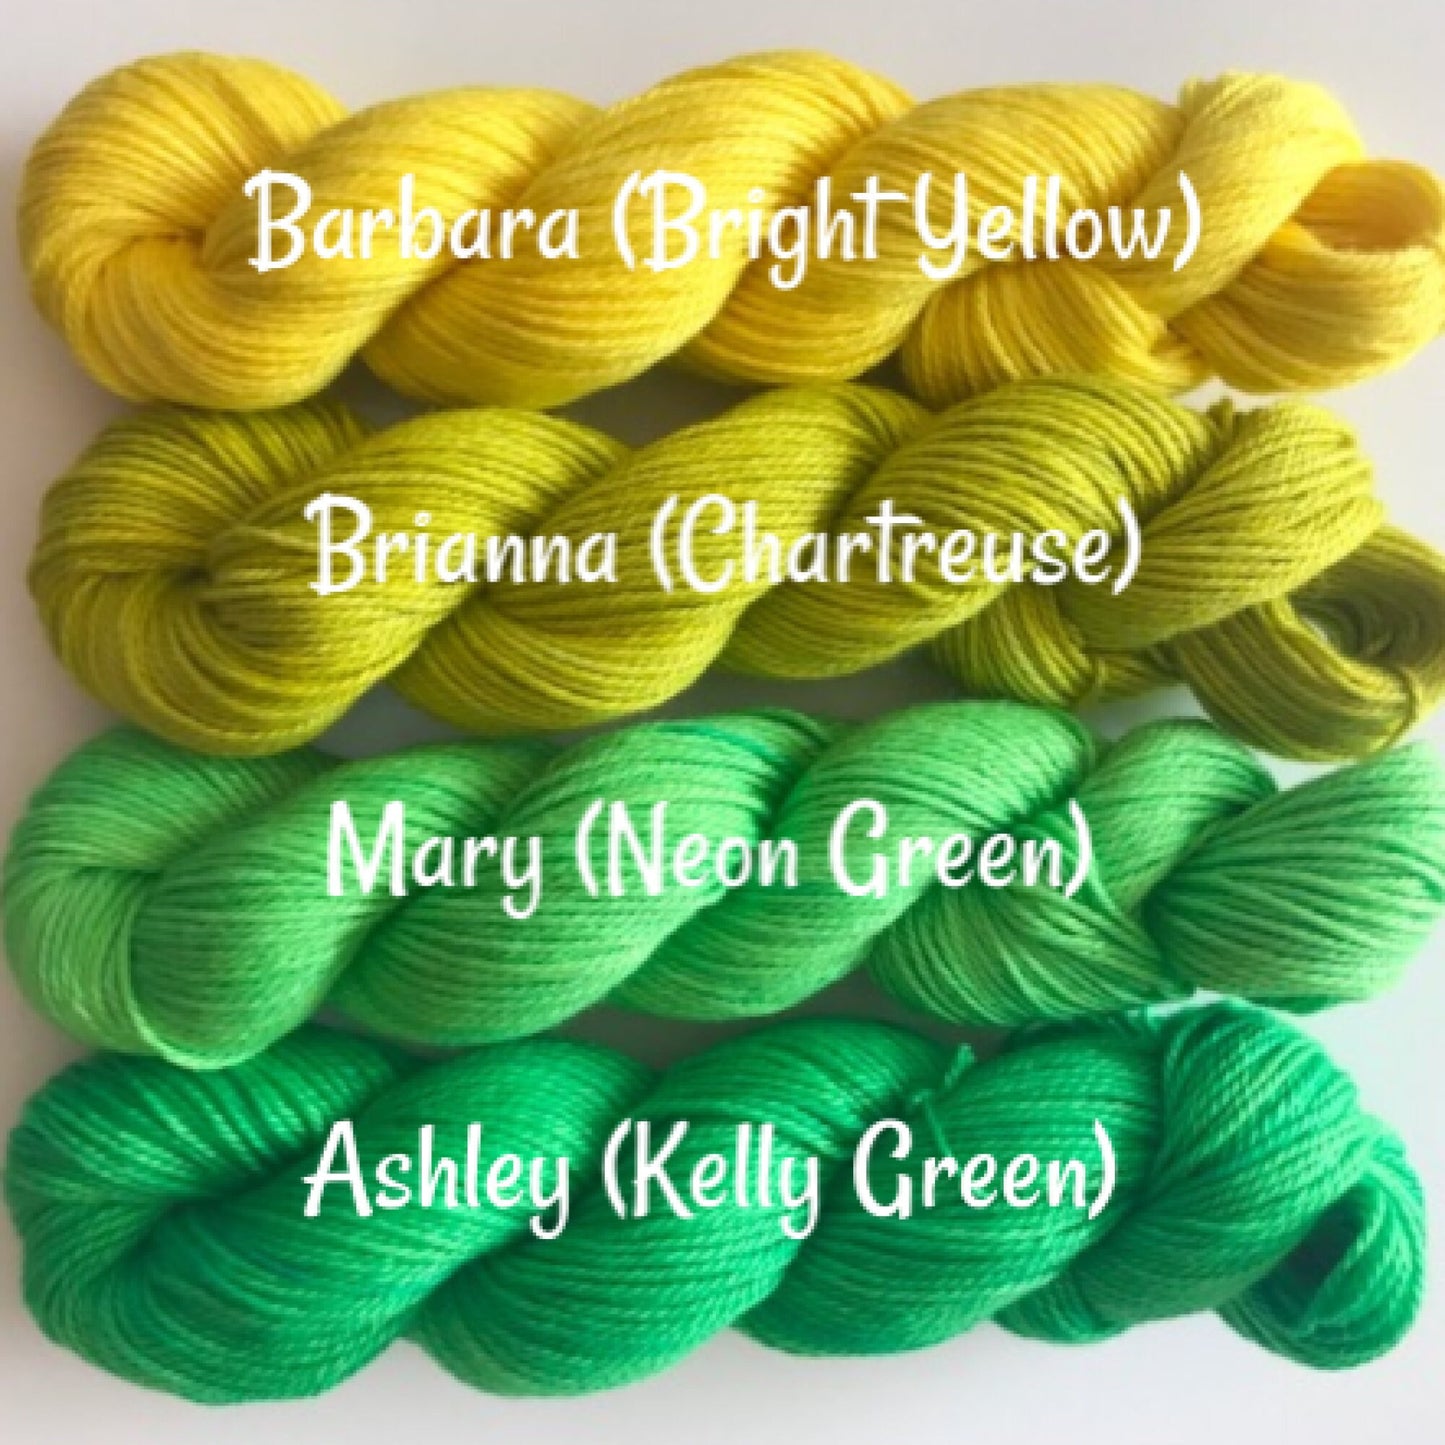 Vegan Sock / Fingering Yarn - Hand Dyed Bamboo Cotton - Choose Color & Skein Size - Yellow and Green Semi Solid - Artisan Yarn - Lace 3 Ply